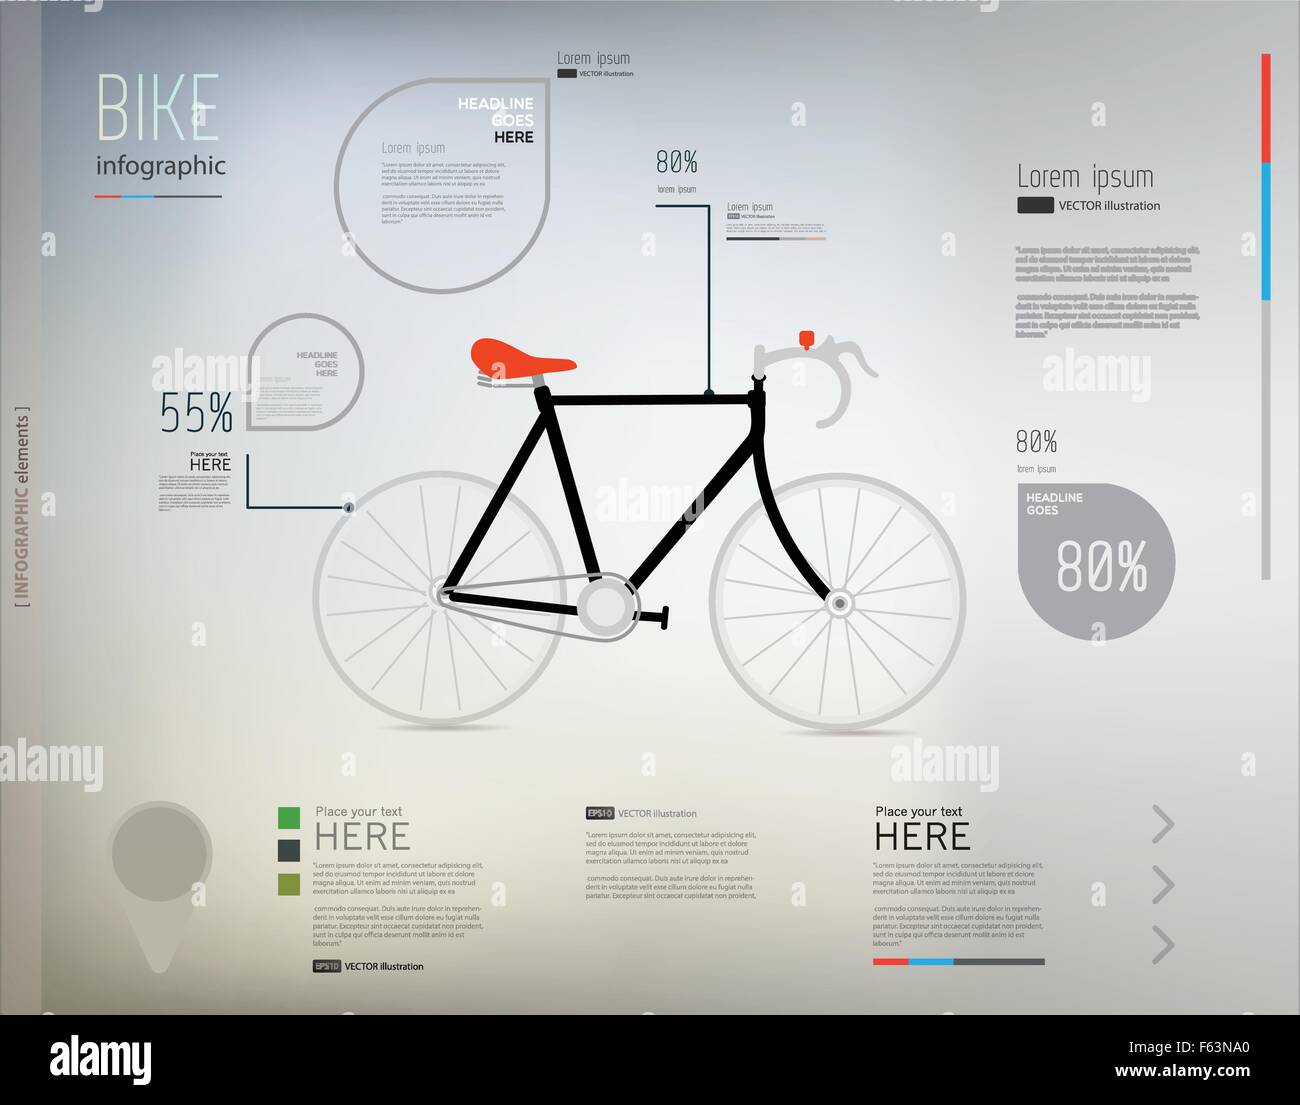 Vector bicycle and info graphic elements. Stock Vector